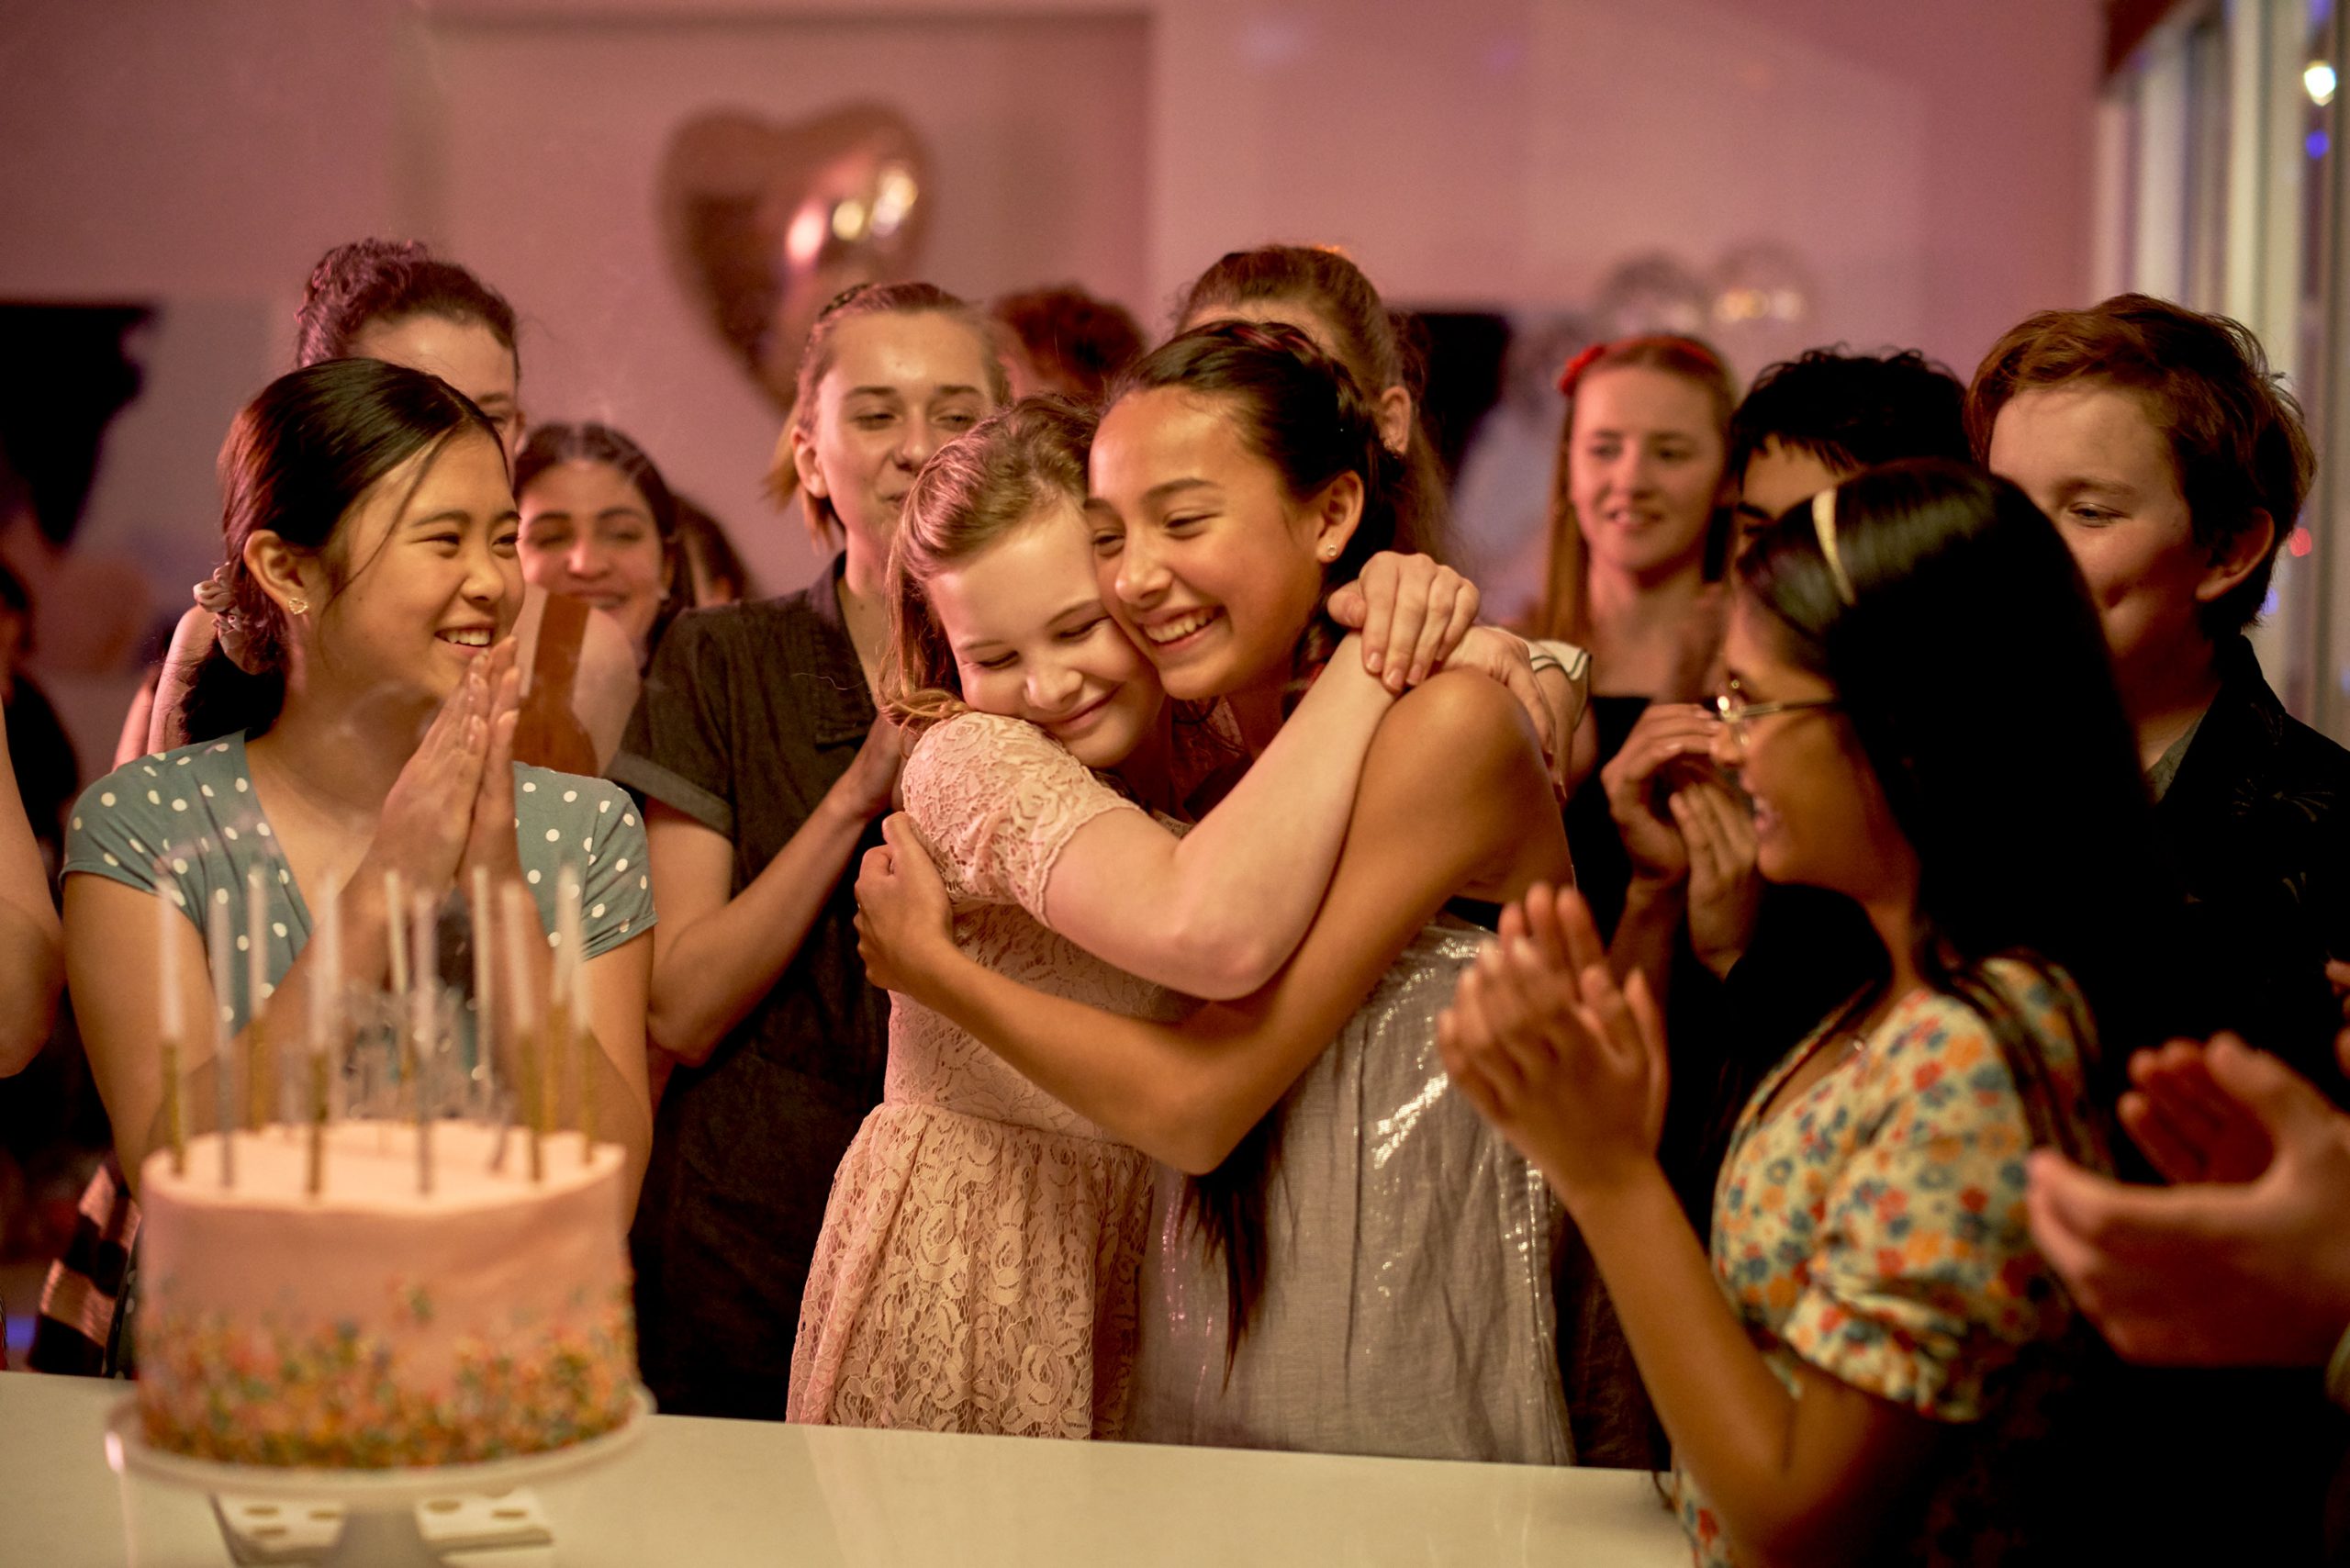 First Day (2019): Evie Macdonald hugs Arwen Diamond, while Elena Liu and Nandini Rajagopal look on. Photo by ian Routledge, courtesy Epic Films